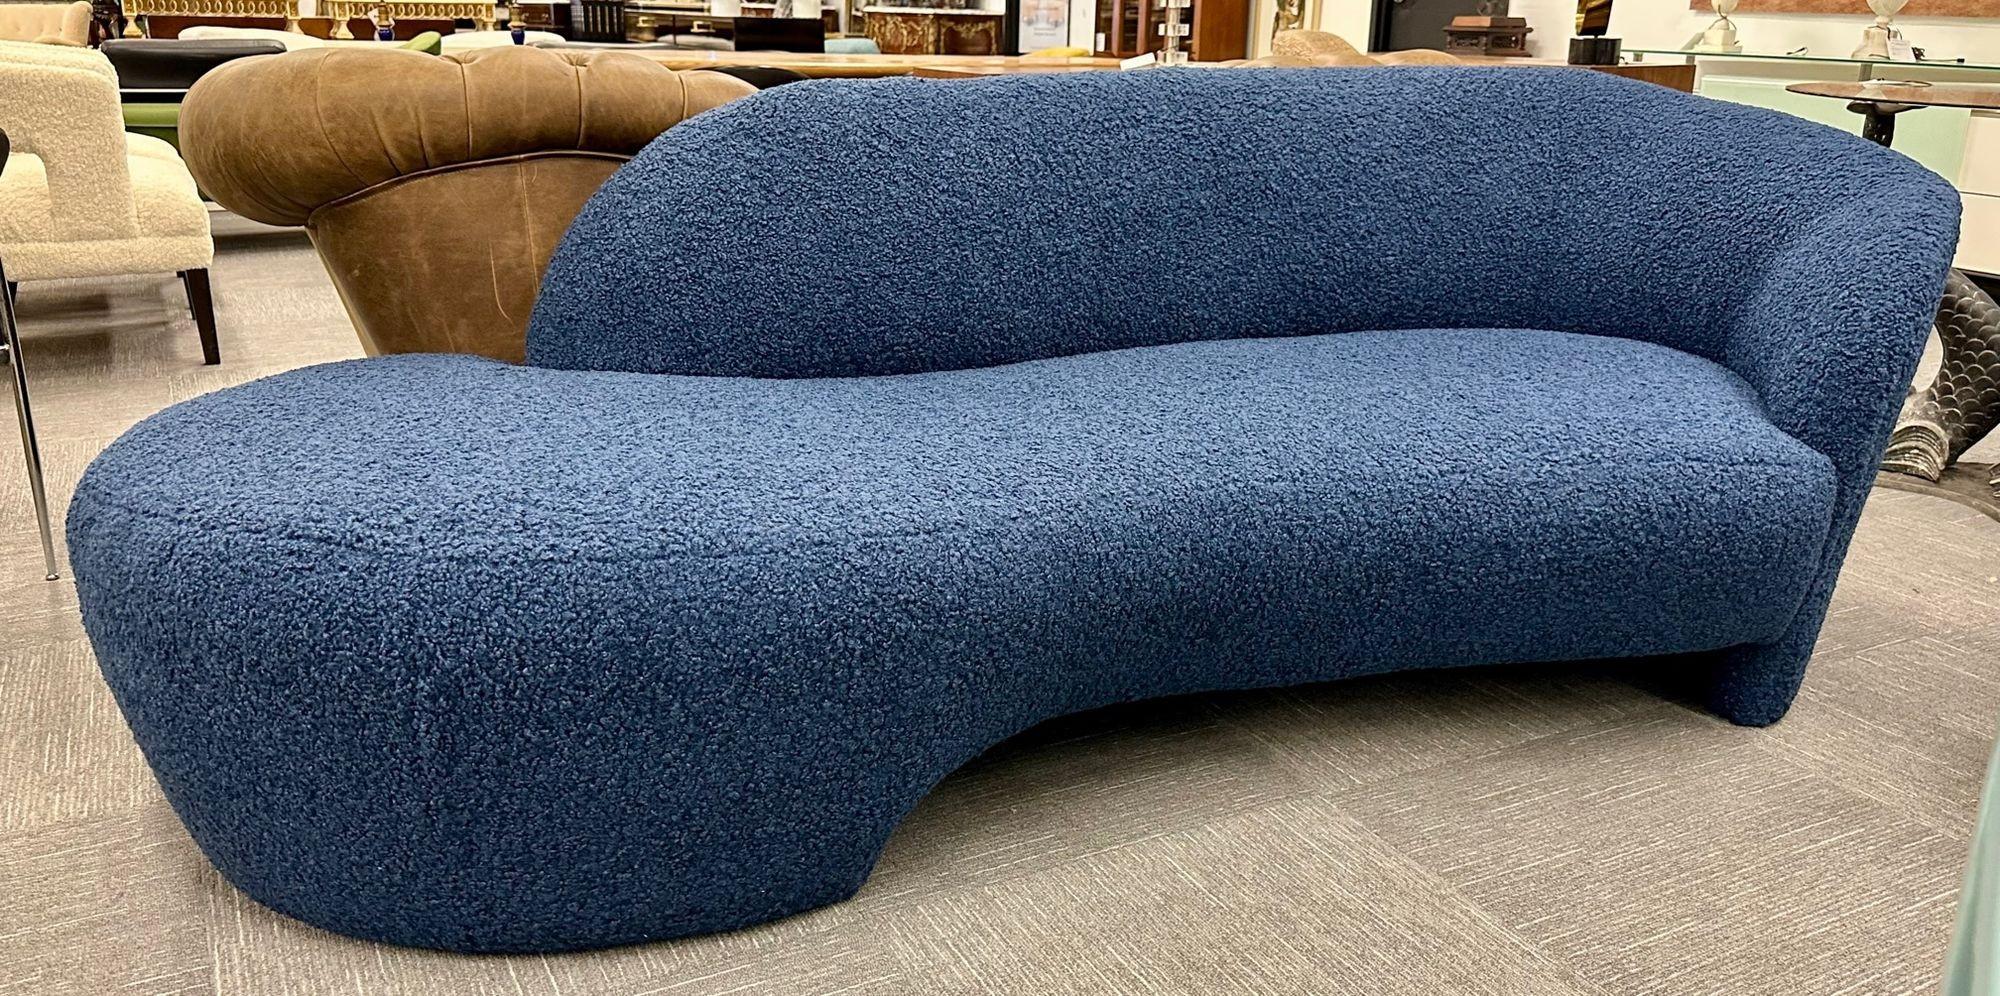 Mid-Century Modern style organic form kidney shaped cloud sofa, blue boucle.
Modern cloud shaped sofa newly upholstered in a cozy blue boucle fabric. 
Seat height: 17.5 inches.